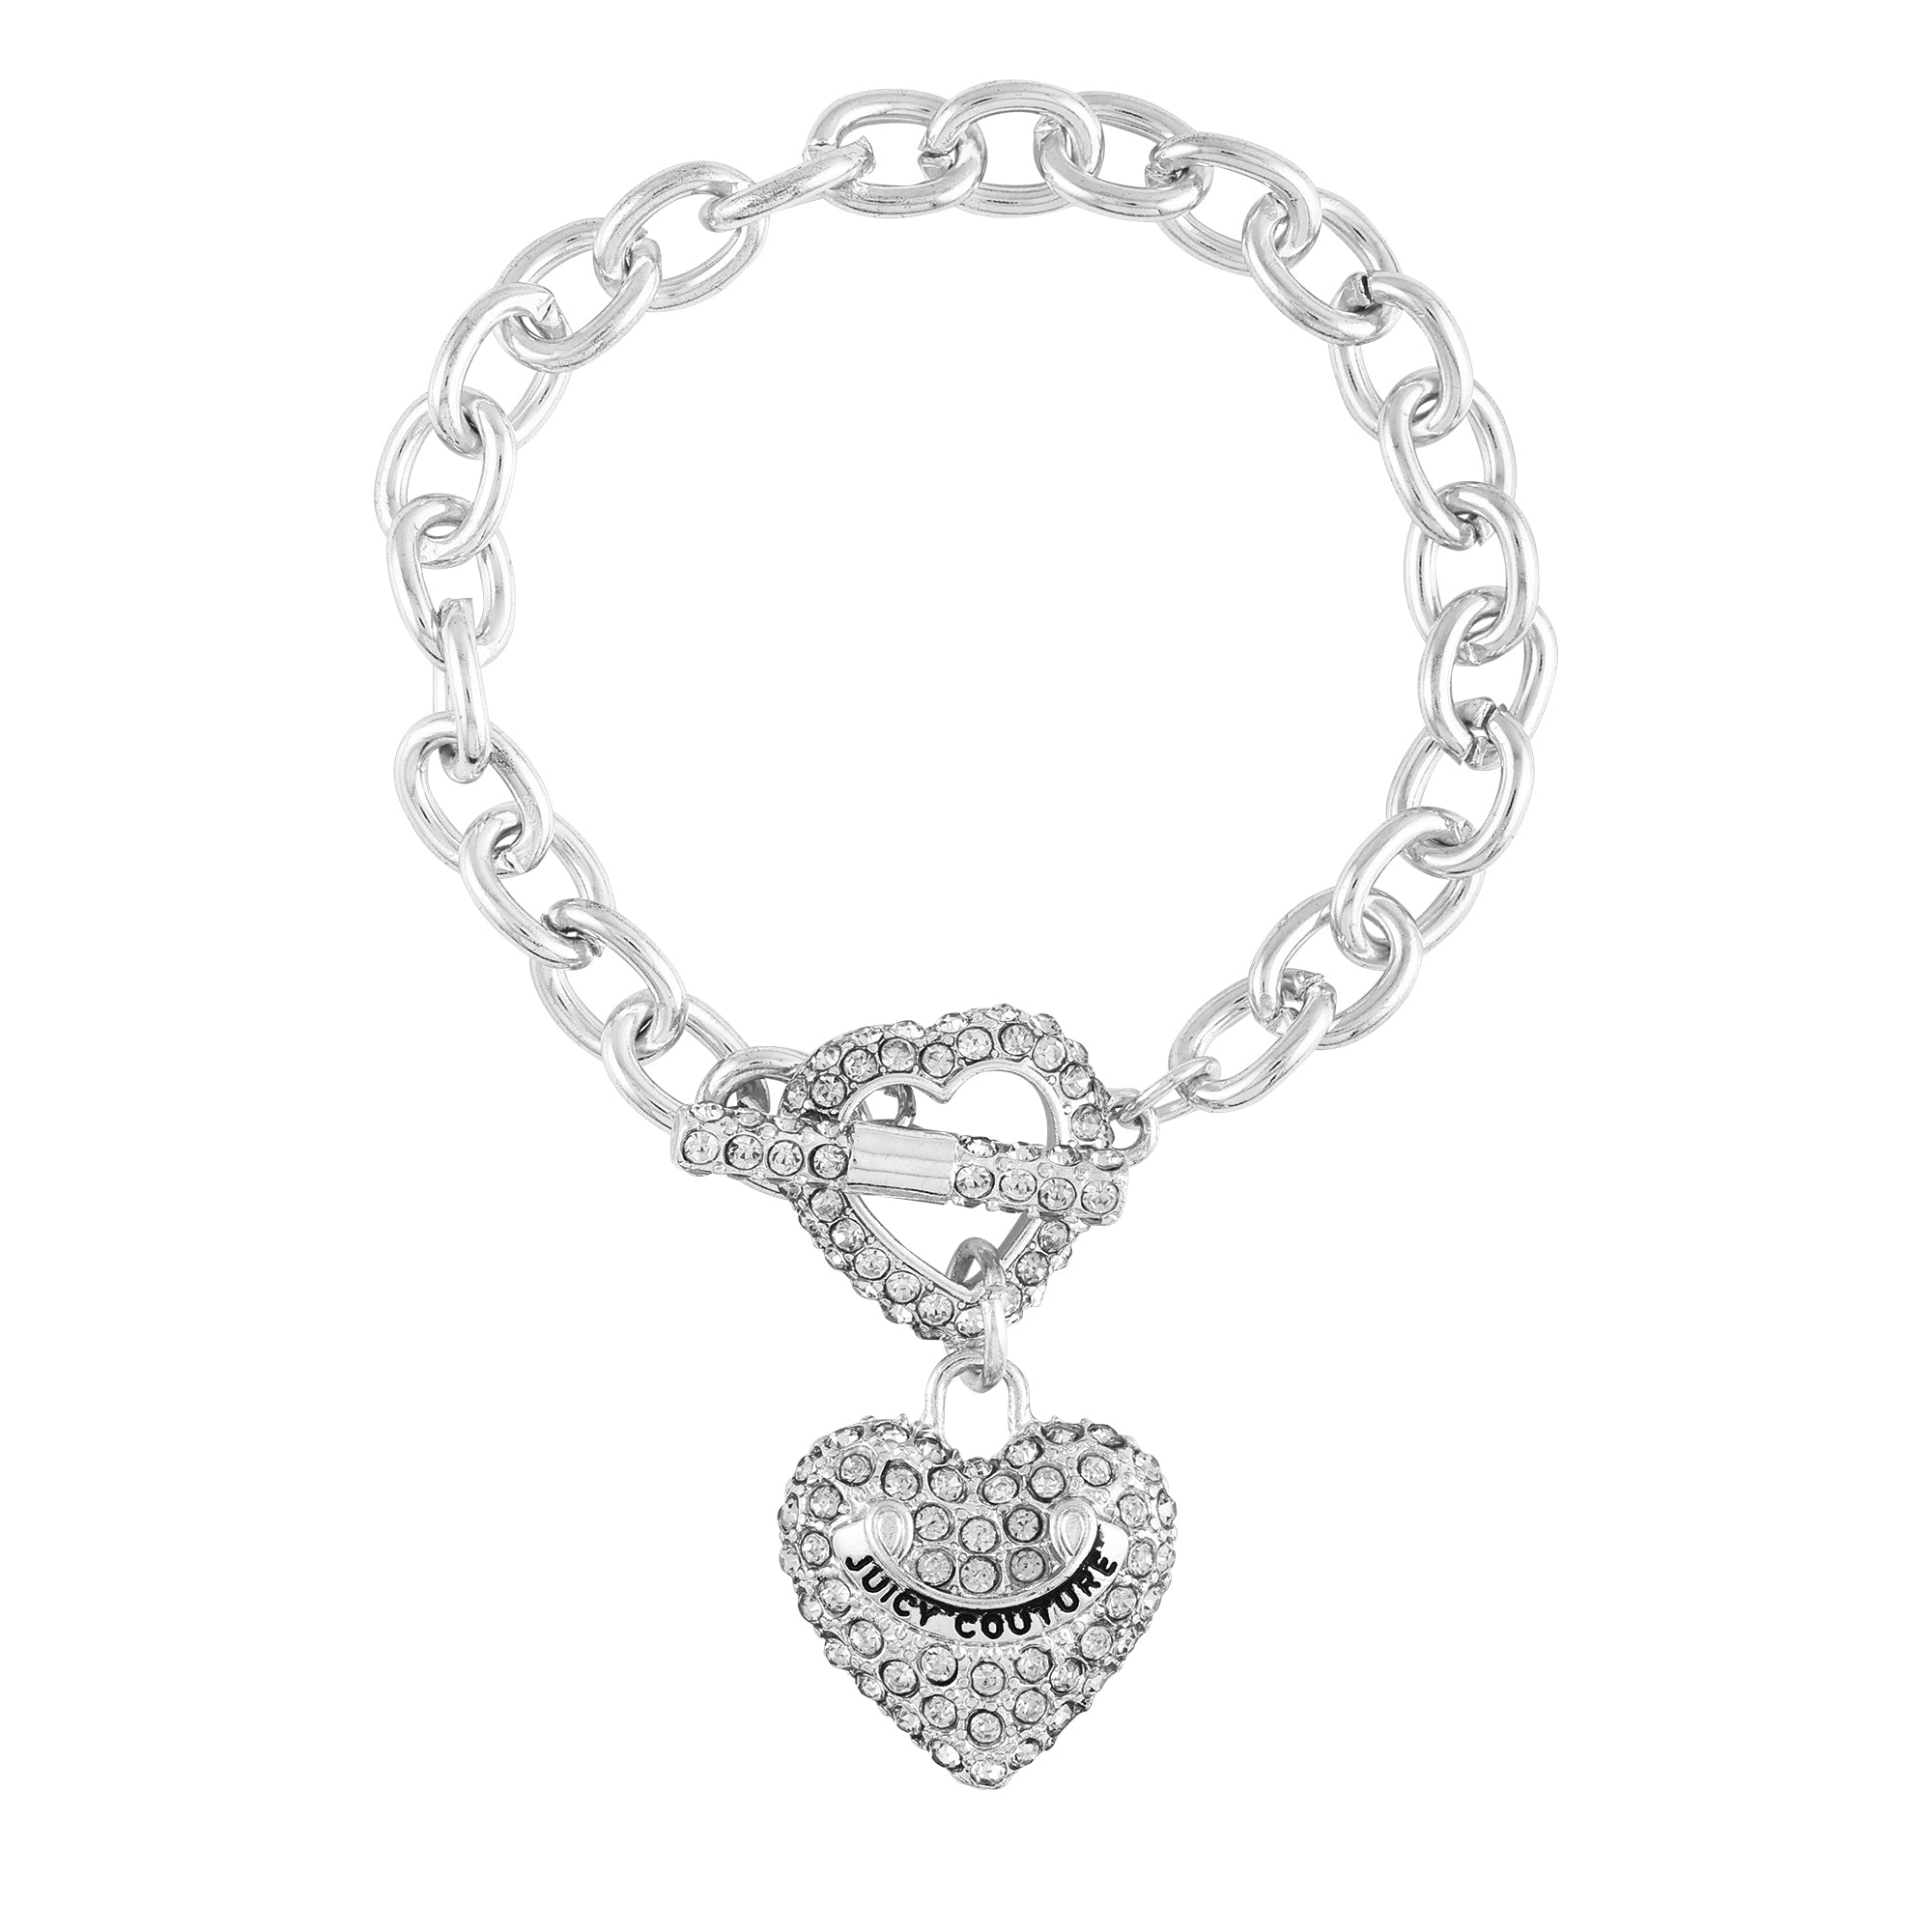 Juicy Couture / Silver Tone / Charm Bracelet / Heart Charm / Faux Locket /  Oval Link / Textured Links / 7.50 Inch / Spring Ring Closure / -  Israel